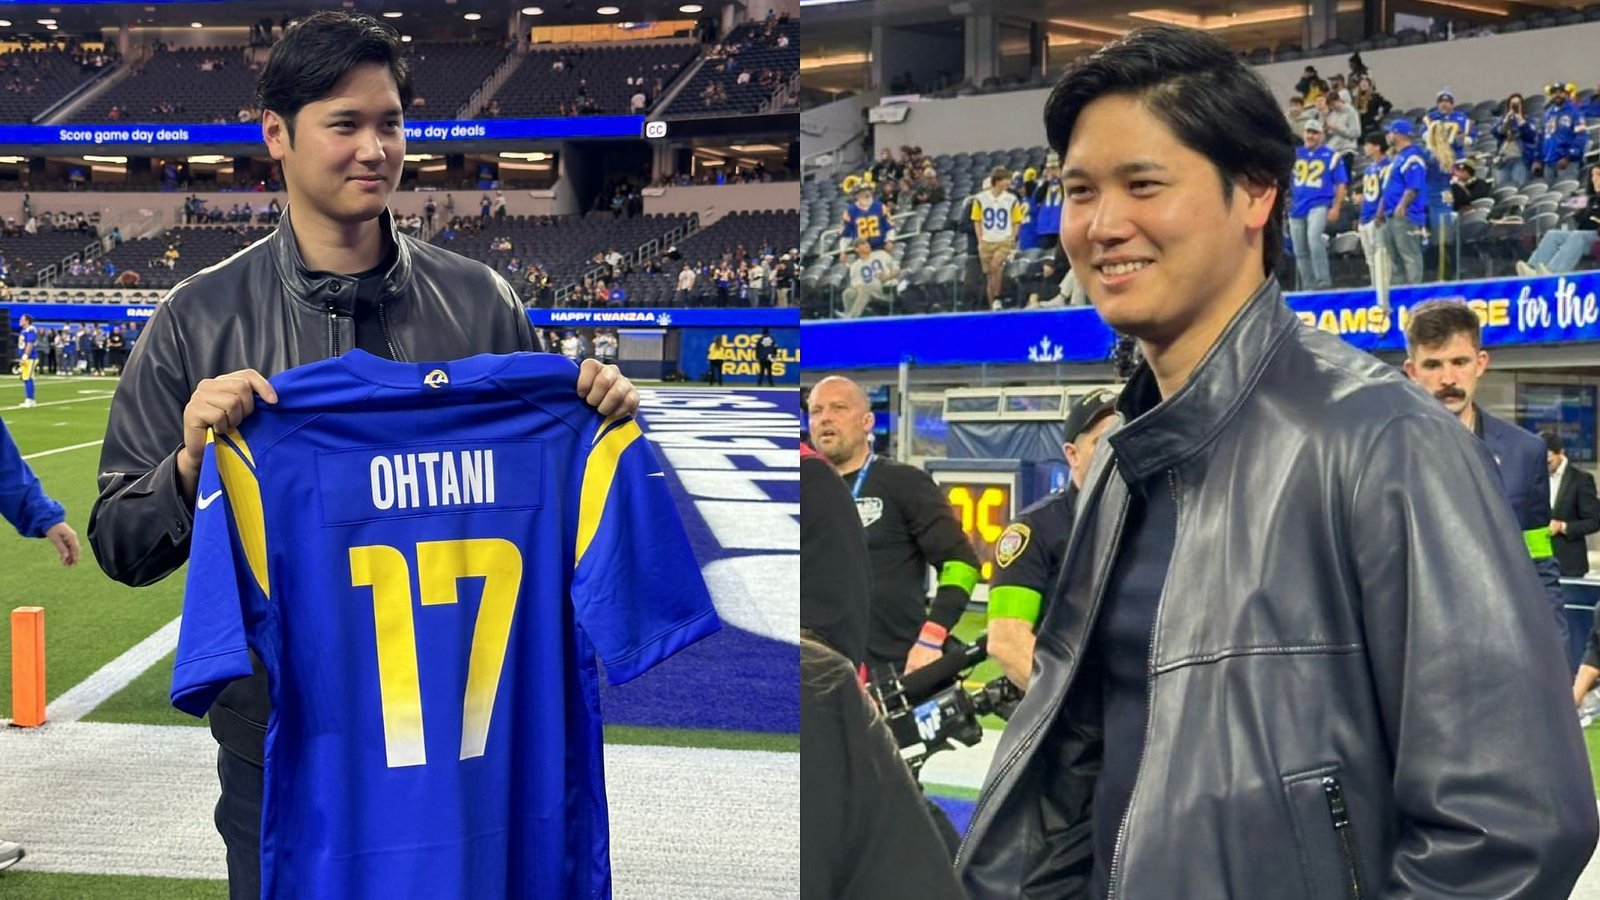 Dodgers’ $700,000,000 Shohei Ohtani gets gifted special jersey by Rams ahead of TNF matchup vs Saints